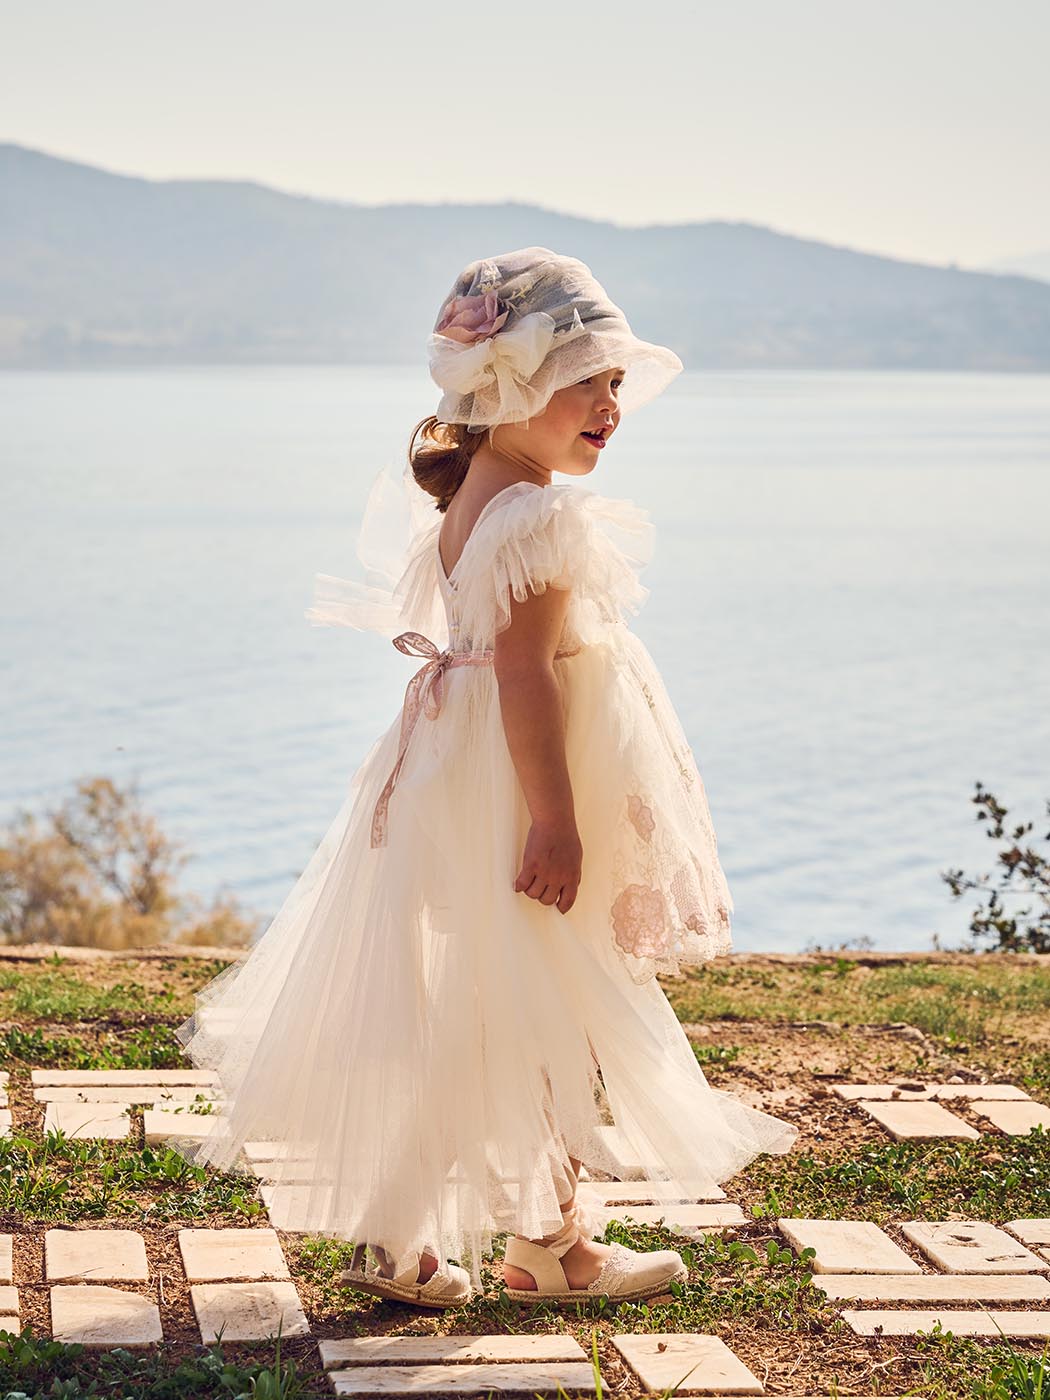 Baptism dress with lace - SWEET SPRING